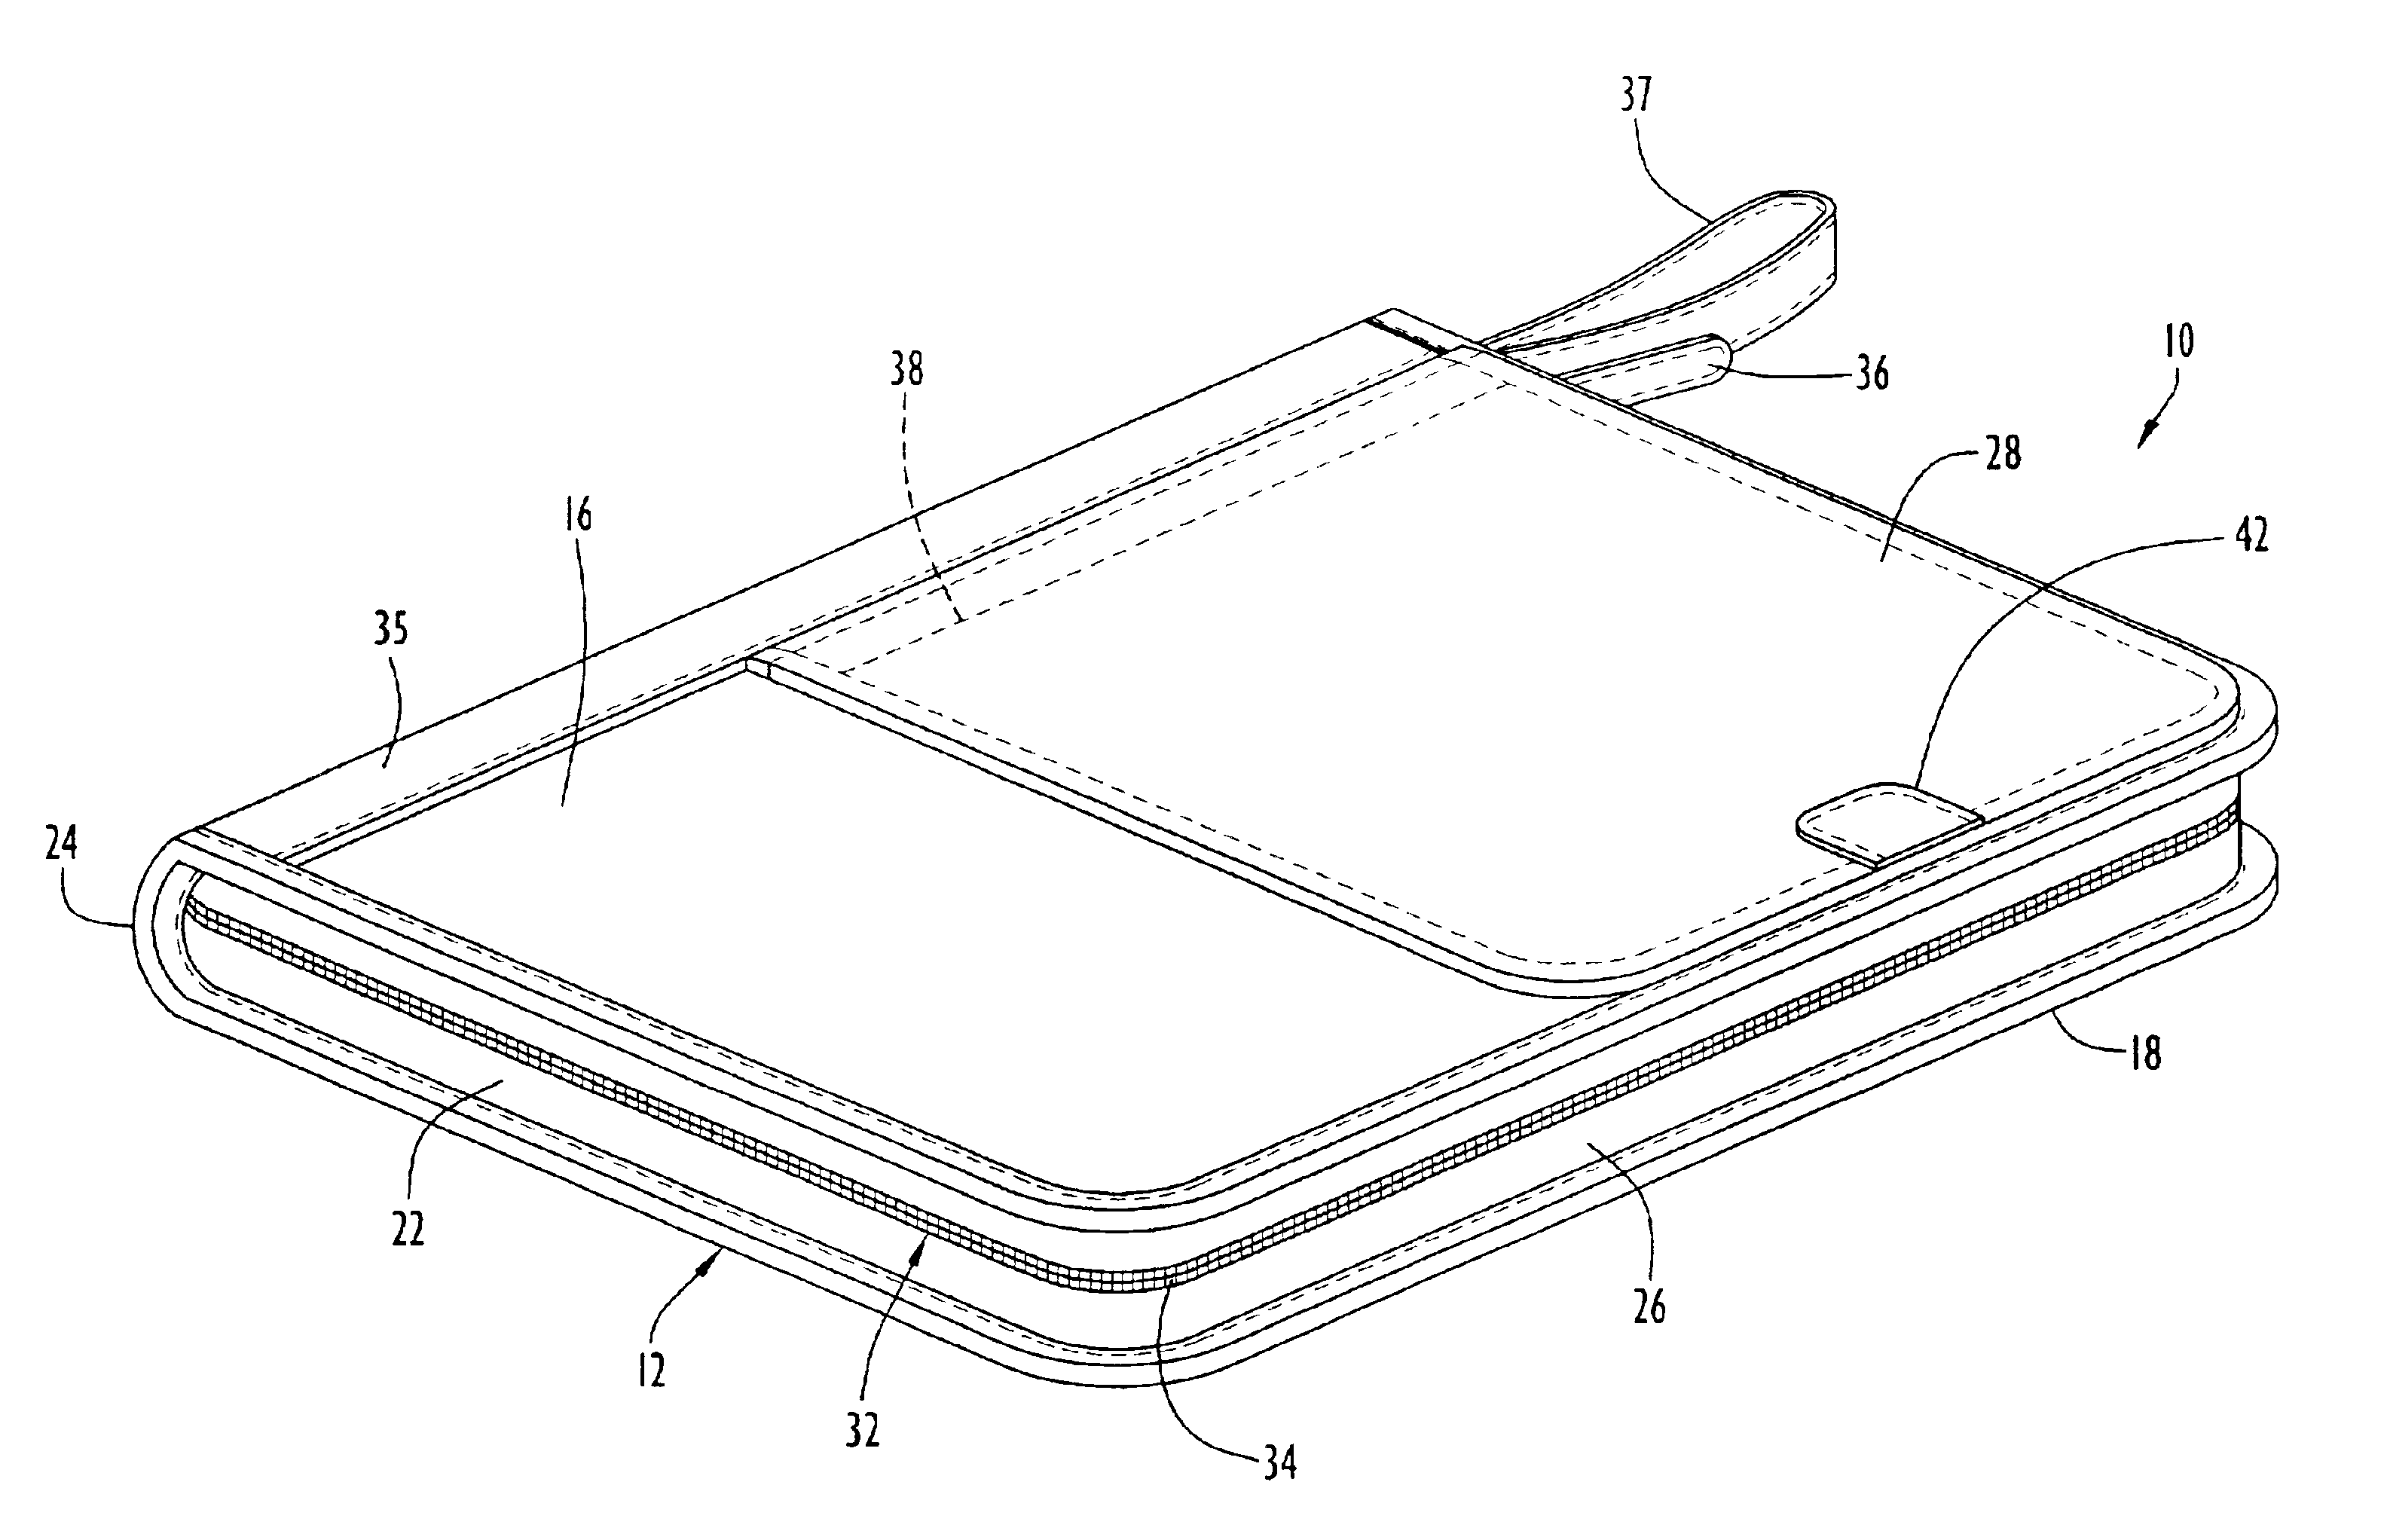 Carrying cases with pop-out compartments